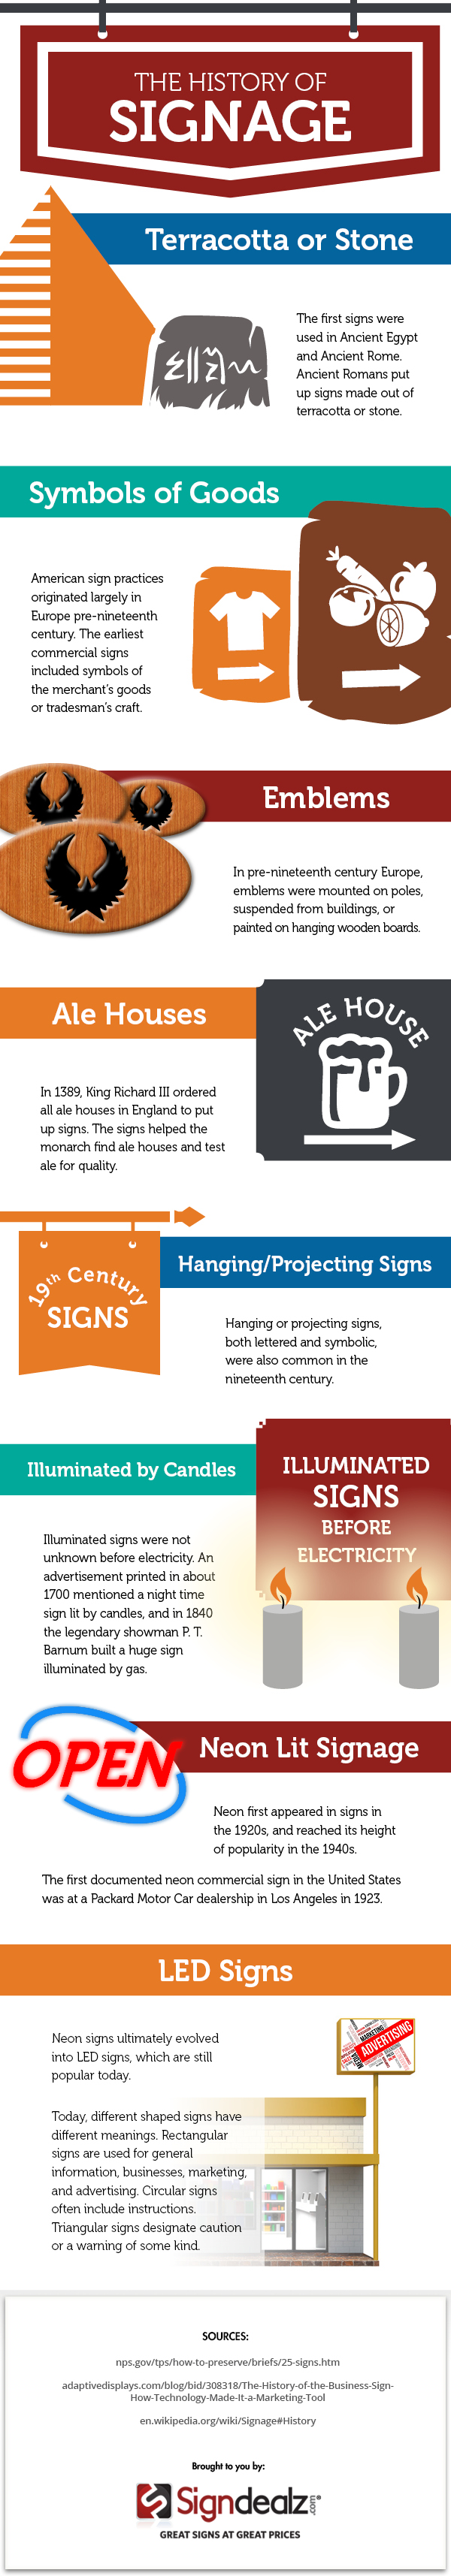 History of business signs infographic